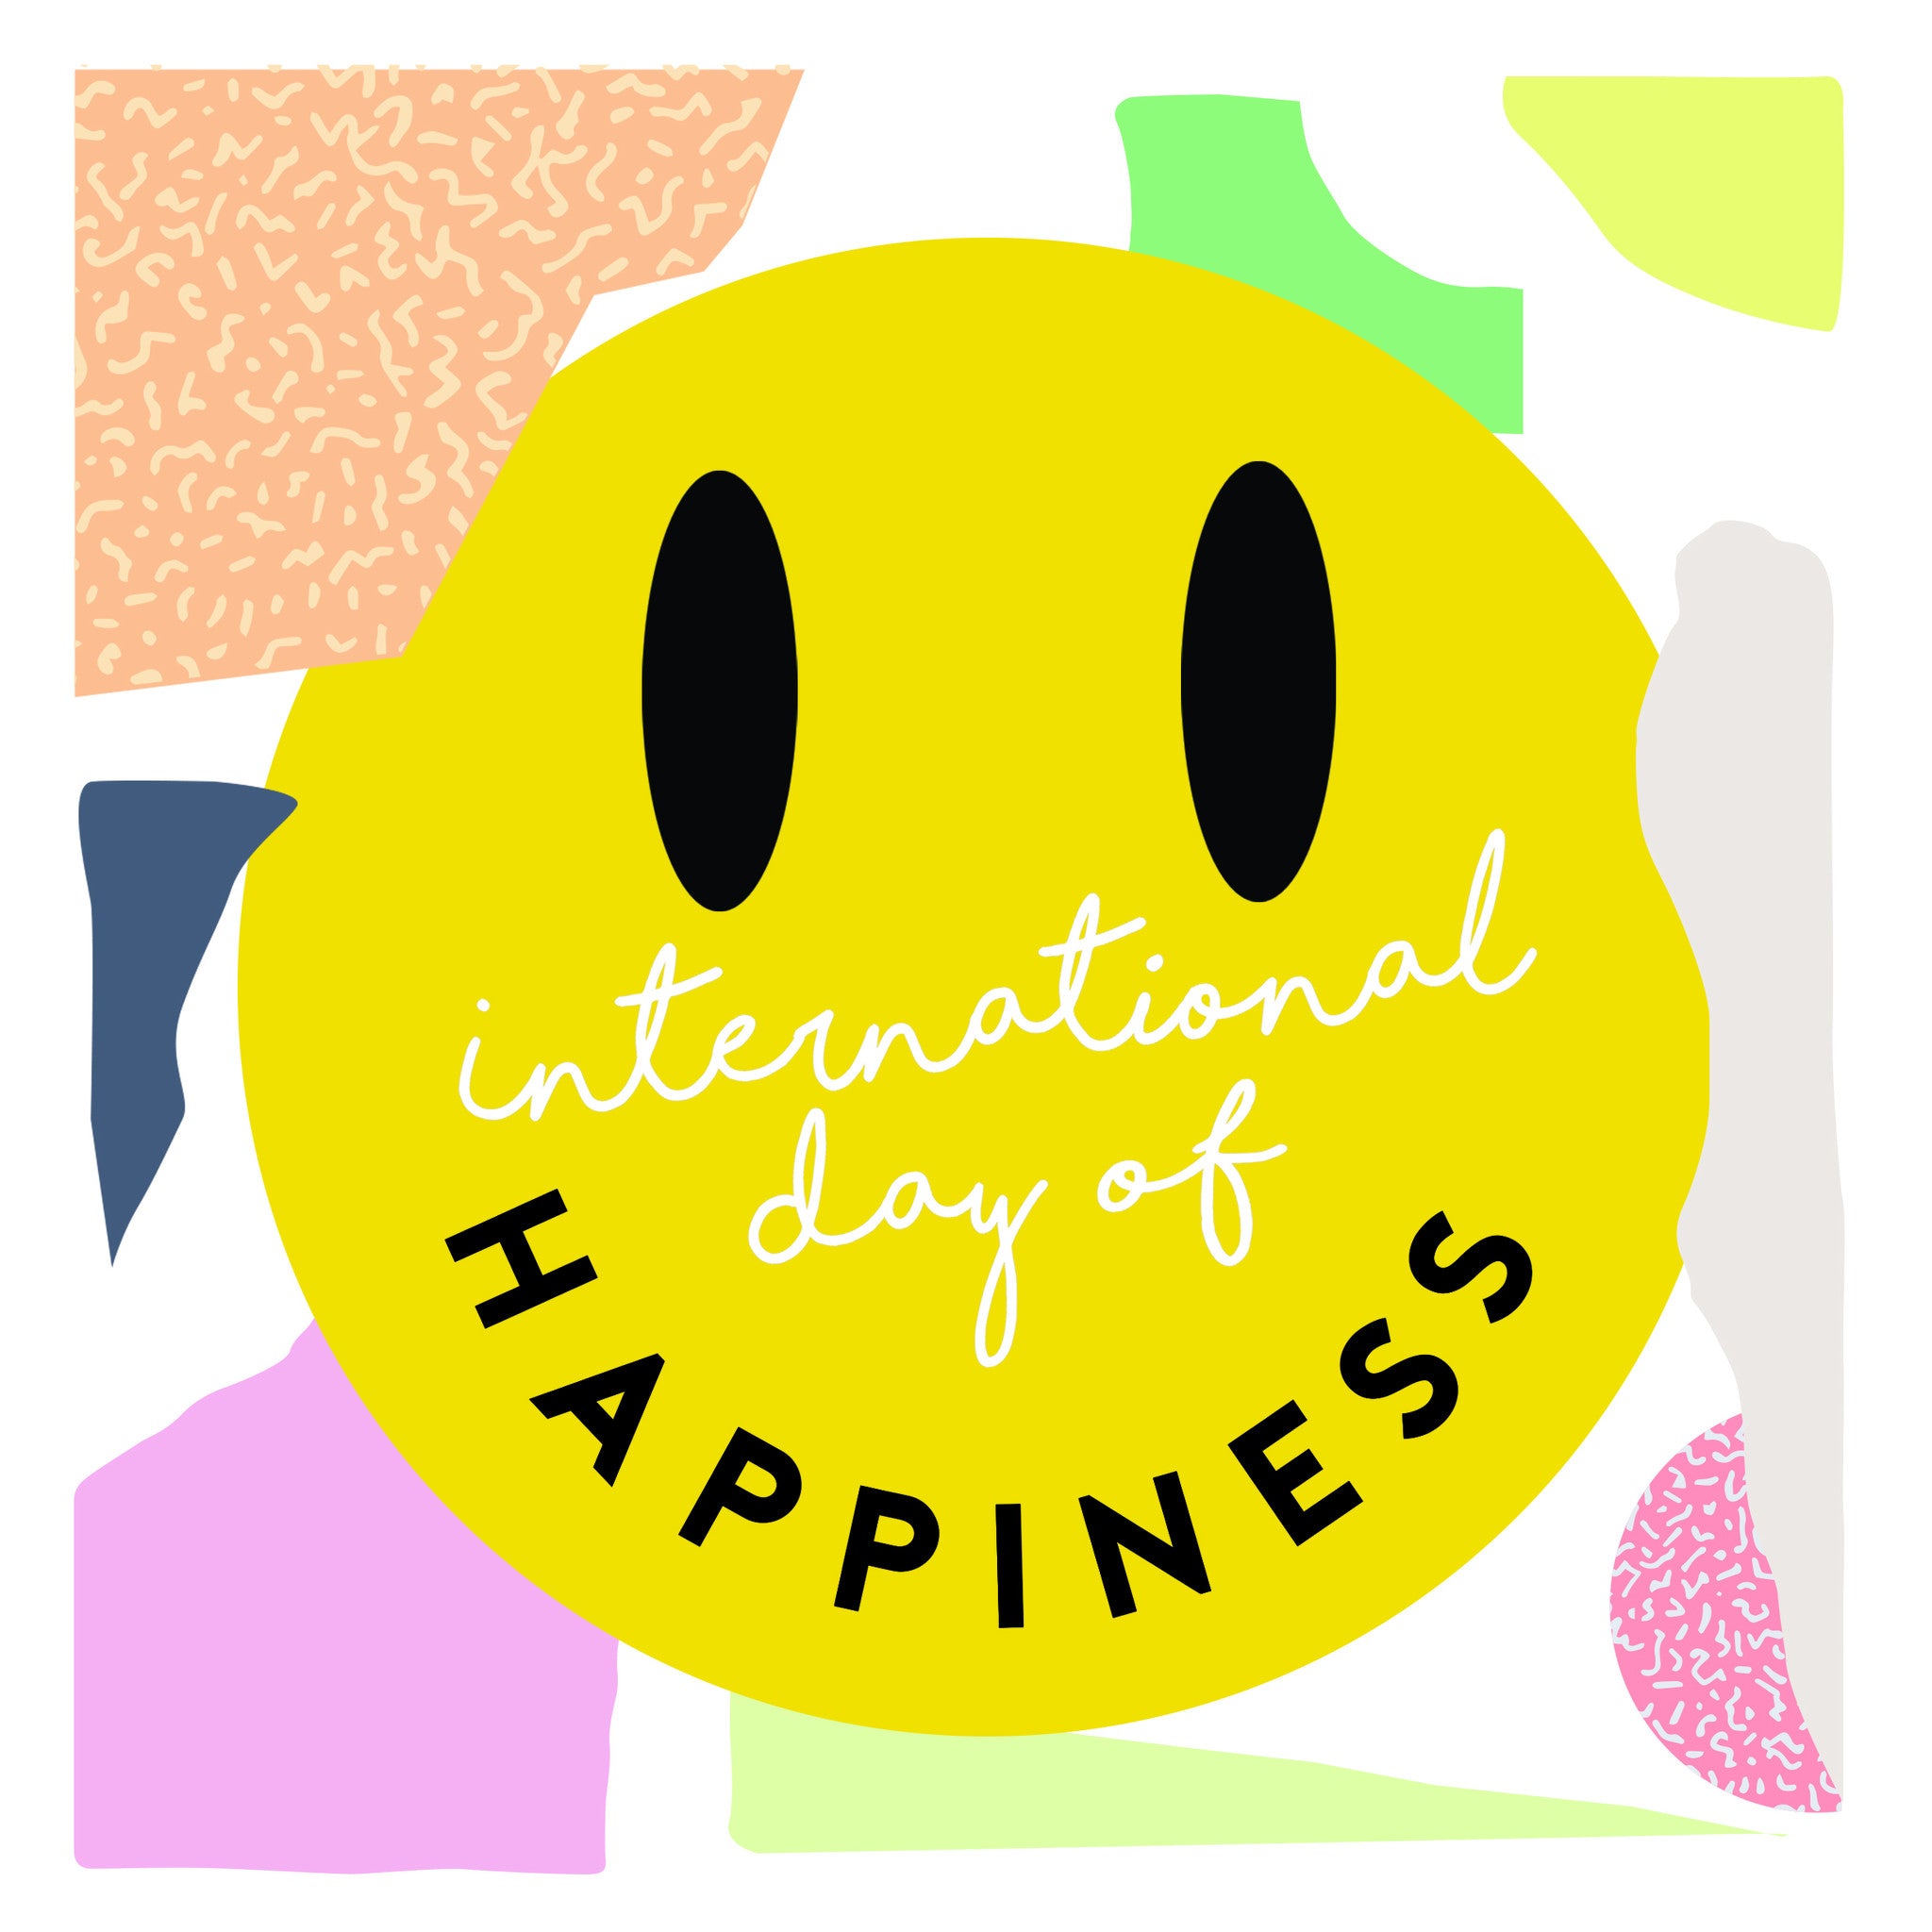 Happy International day of Happiness!